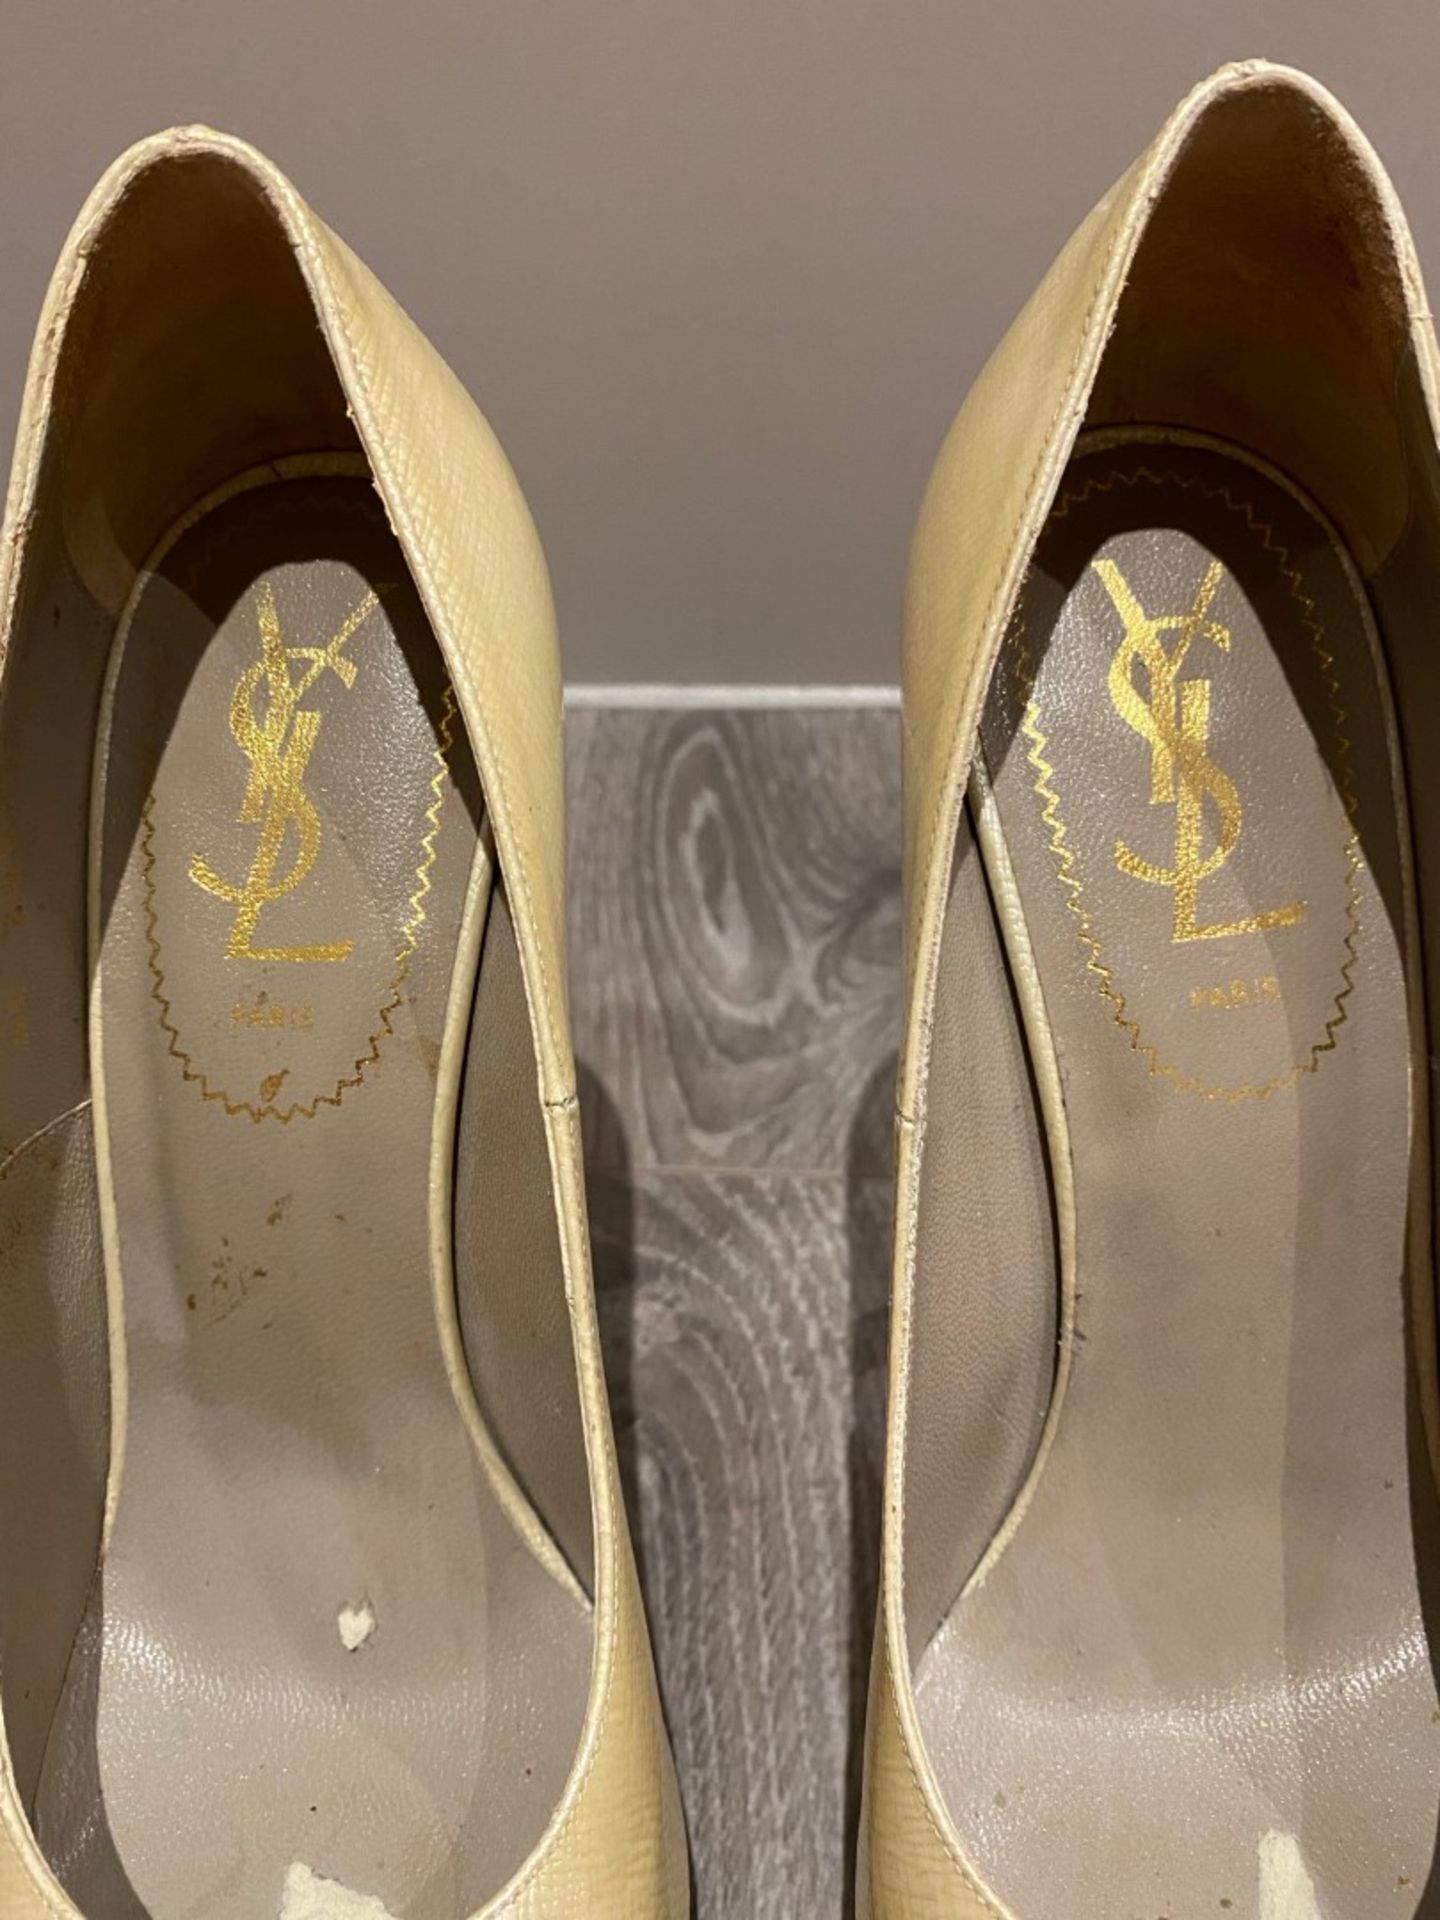 1 x Pair Of Genuine YSL High Heel Shoes In Champagne - Size: 36 - Preowned in Worn Condition - Ref: - Image 4 of 5